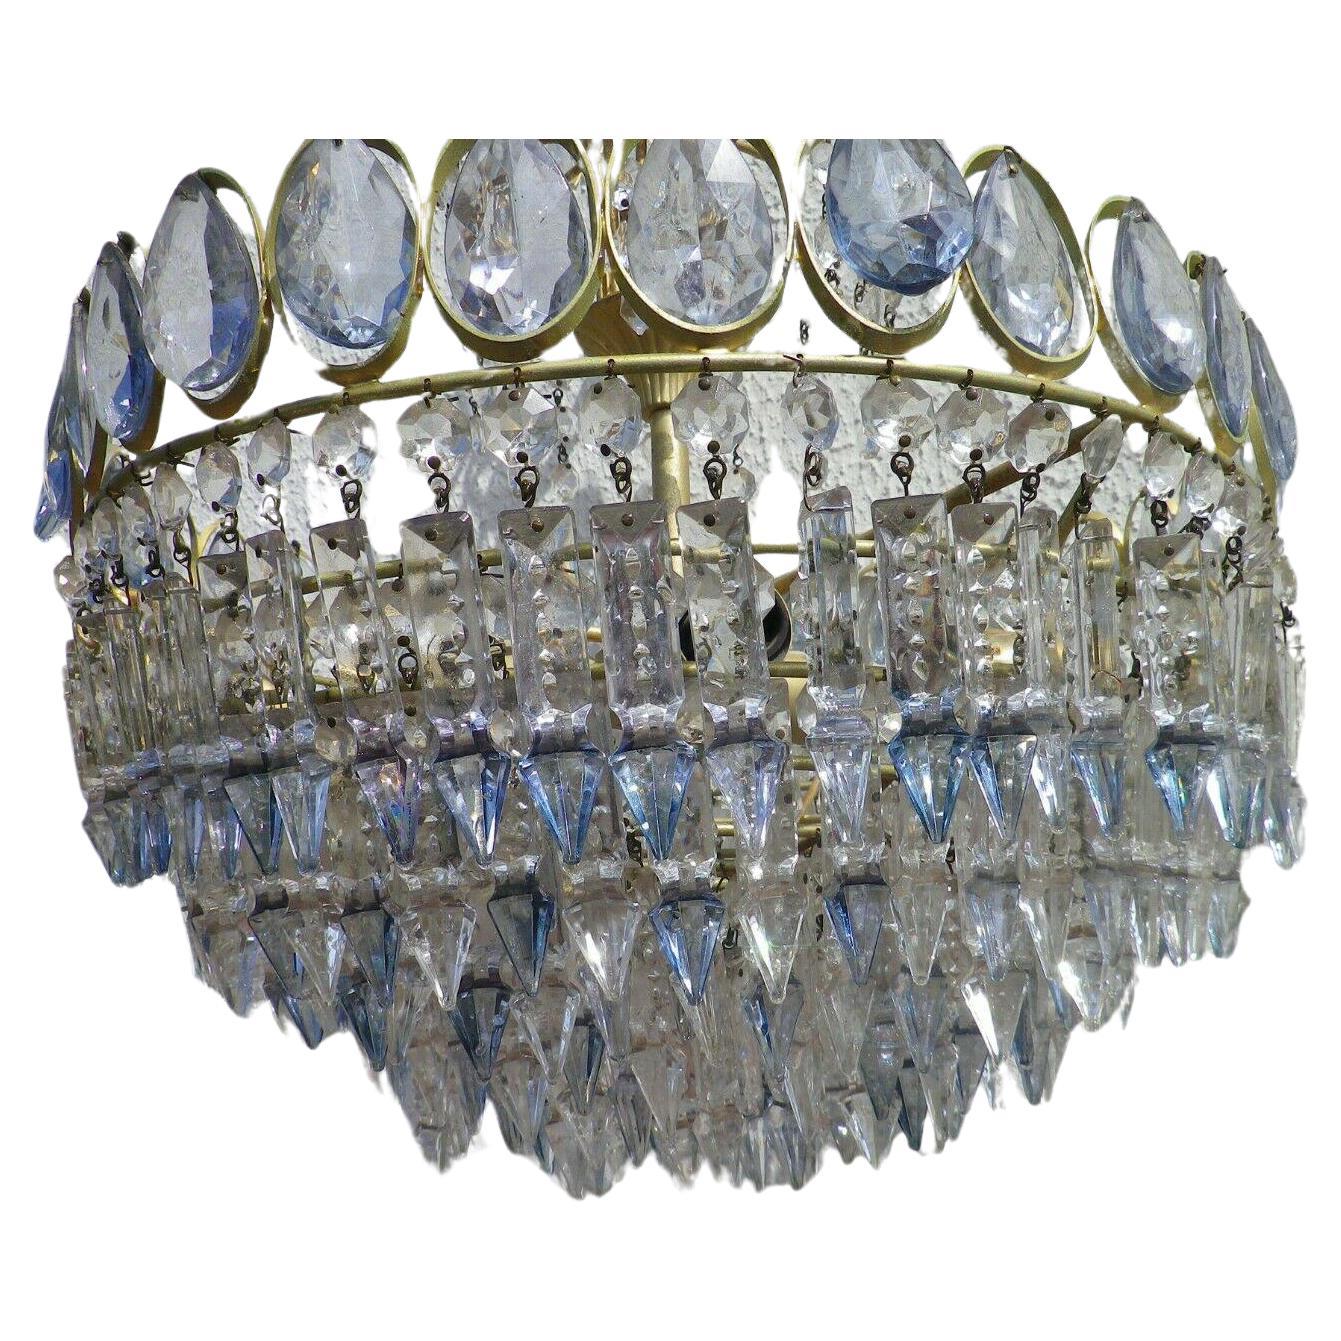 c1960's Austrian Mid Century Modern Cut Crystal Chandelier in Pale Blue Crystal. Full with many tiers of Crystal. 